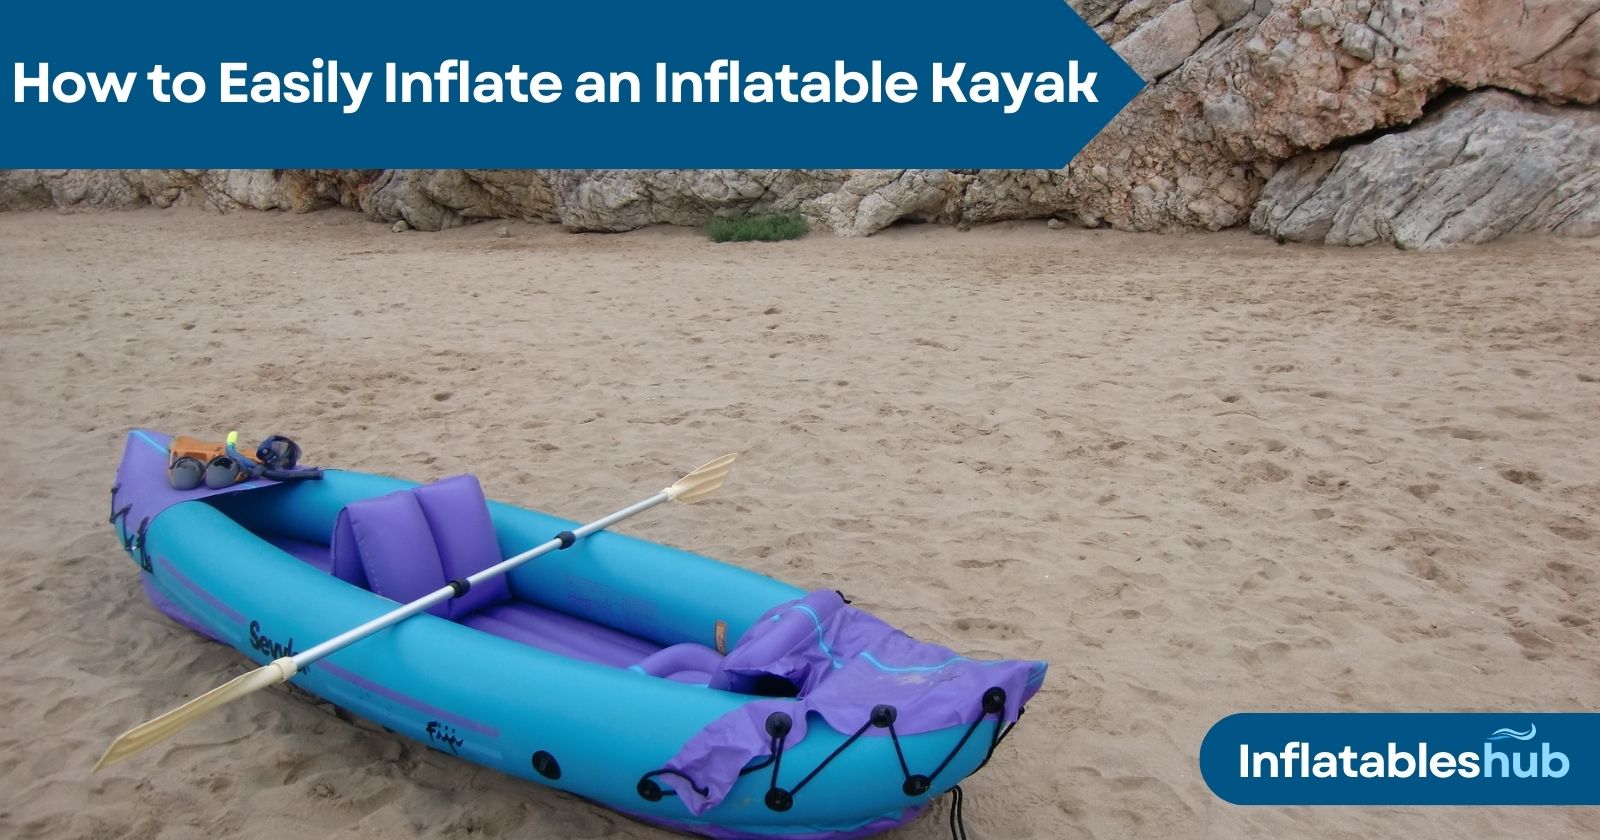 How to Inflate an Inflatable Kayak